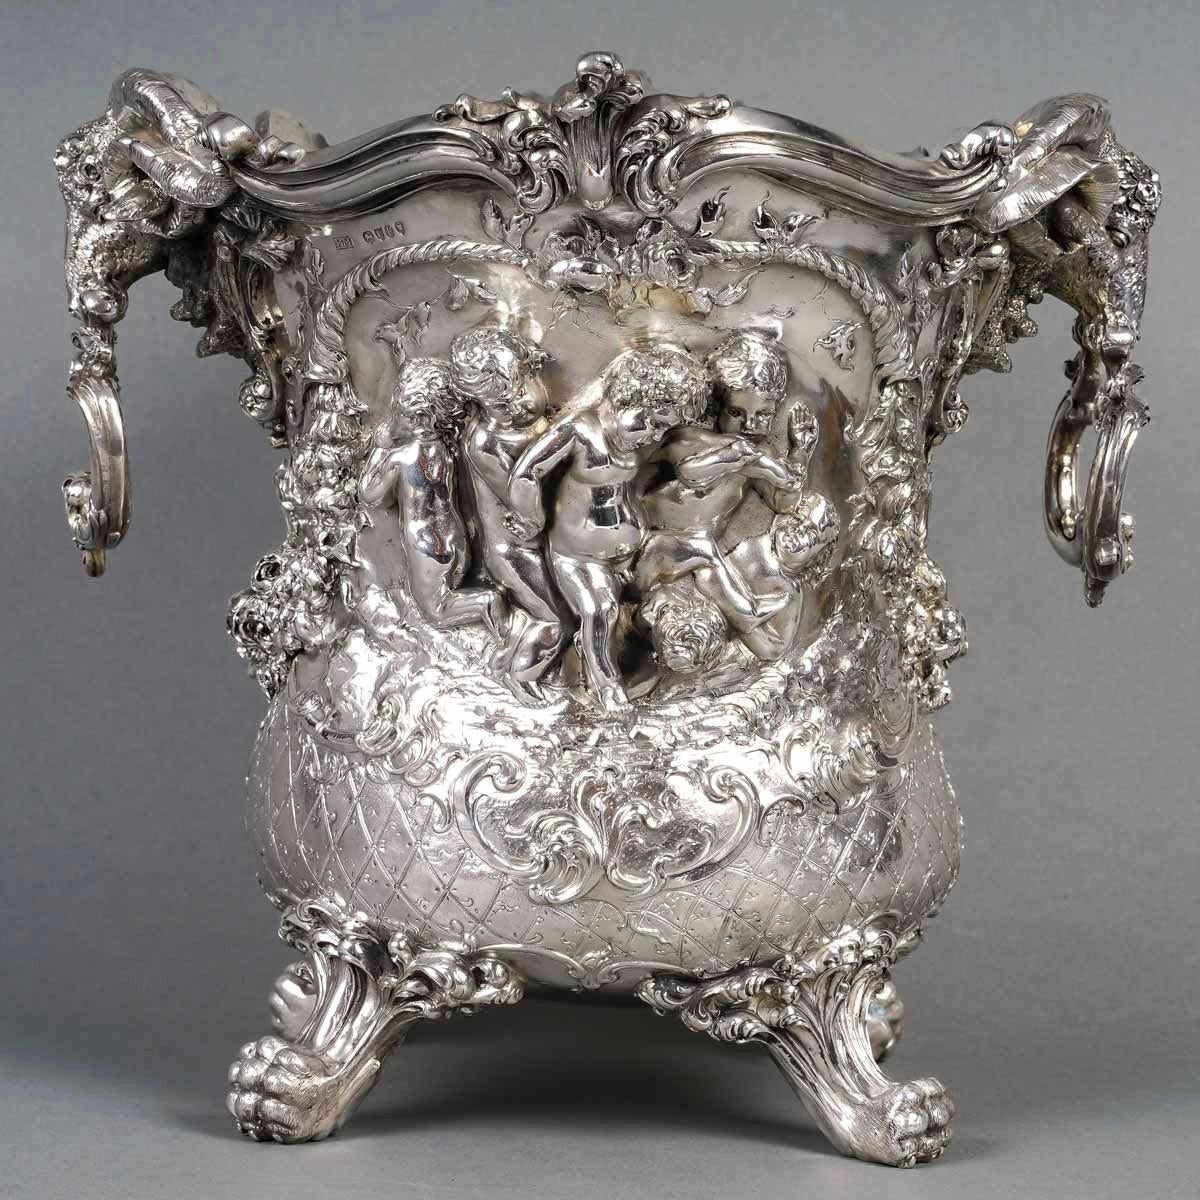 Solid silver champagne bucket in scalloped shape resting on four claw feet, Decorated in strong relief of playing putti, inserted in cartridges, surrounded by garlands of flowers and cornucopias.

The leafy handles are held by two mouflon heads.